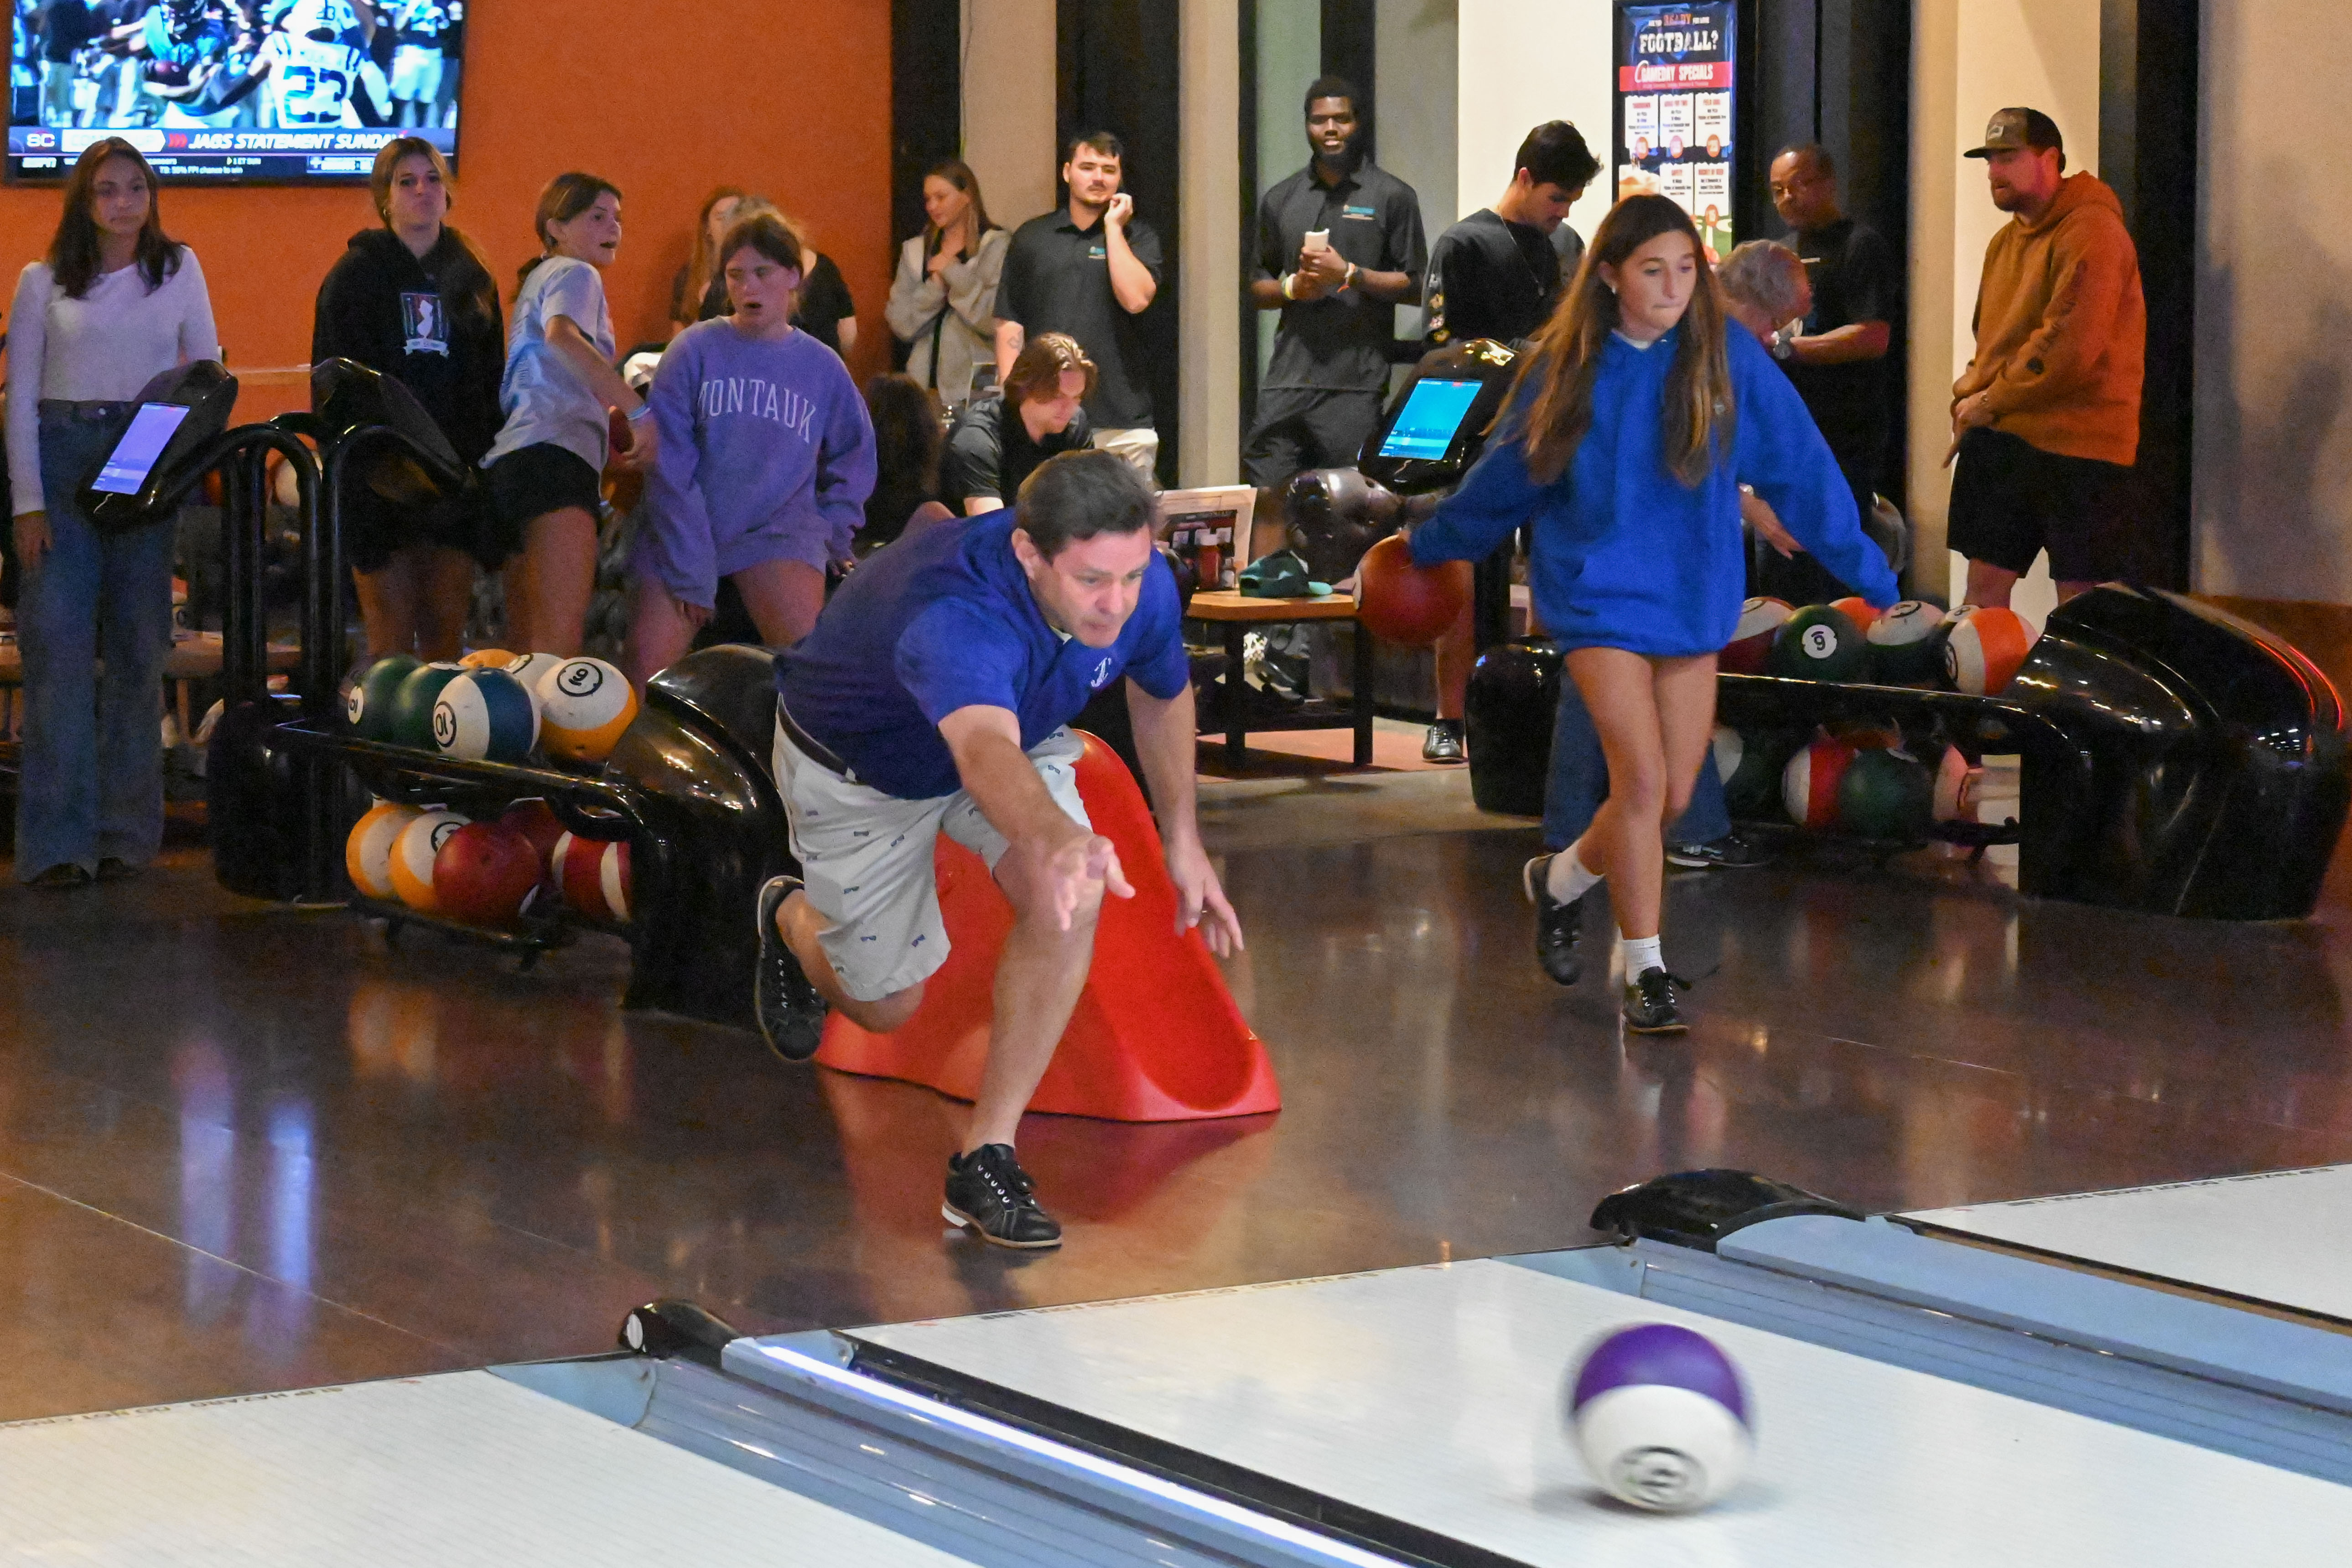 A photo of man bowling at CCU Strikes for Symposium event